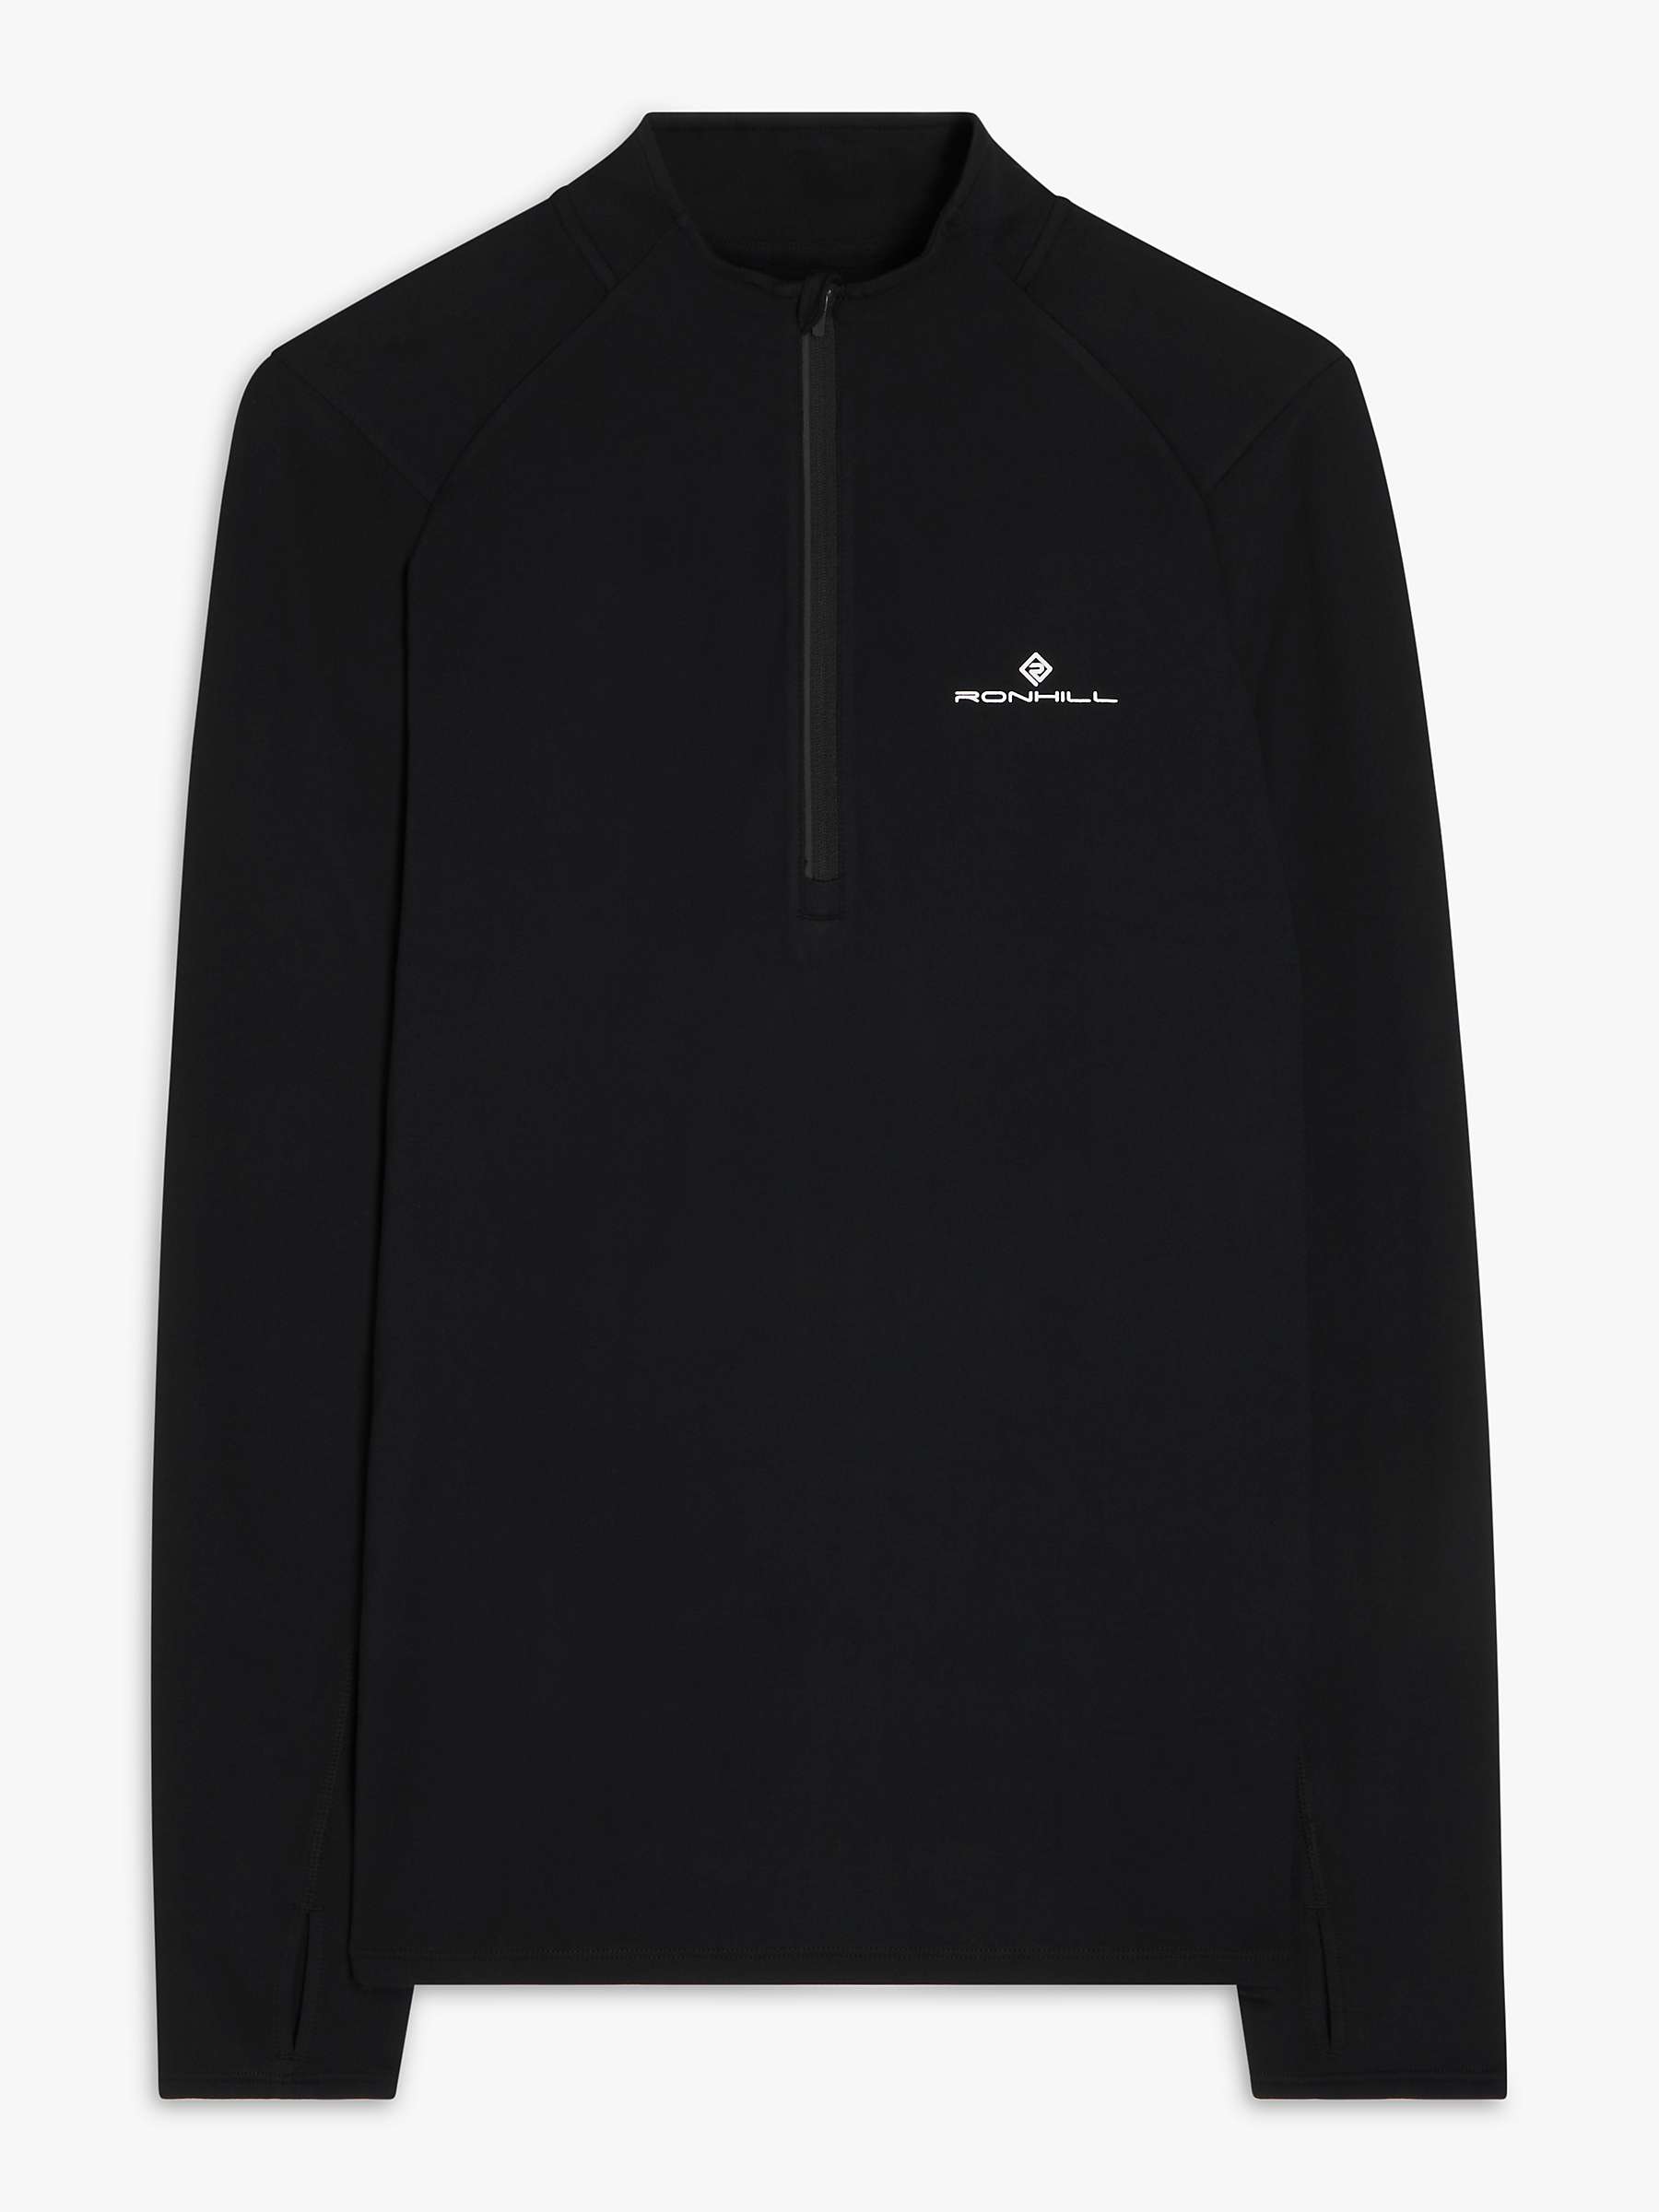 Buy Ronhill Thermal Base Layer, Black Online at johnlewis.com